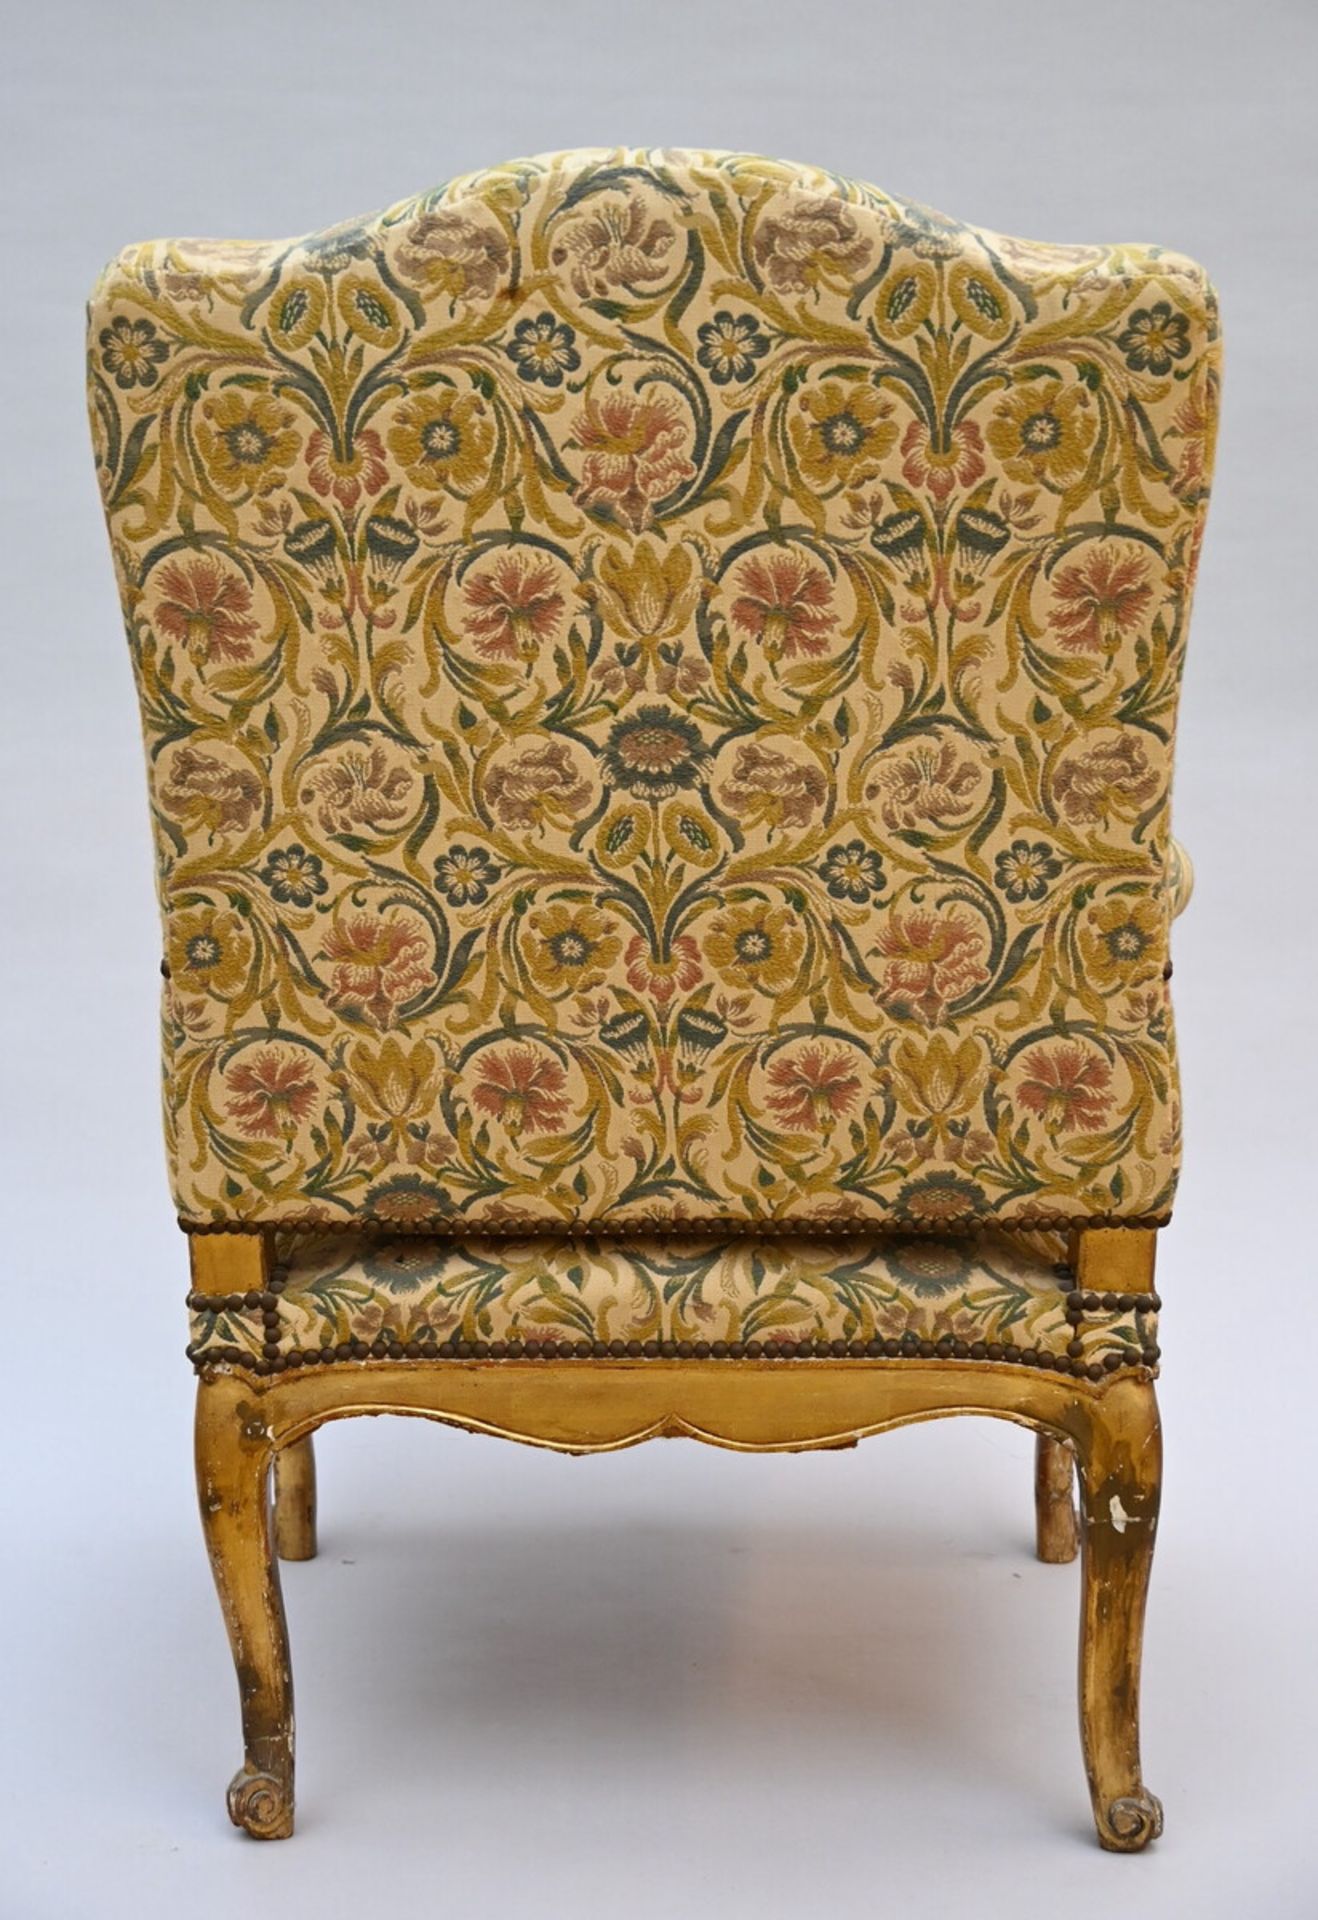 Louis XV seat in gilded wood, 18th century (105x74x64cm) - Image 3 of 4